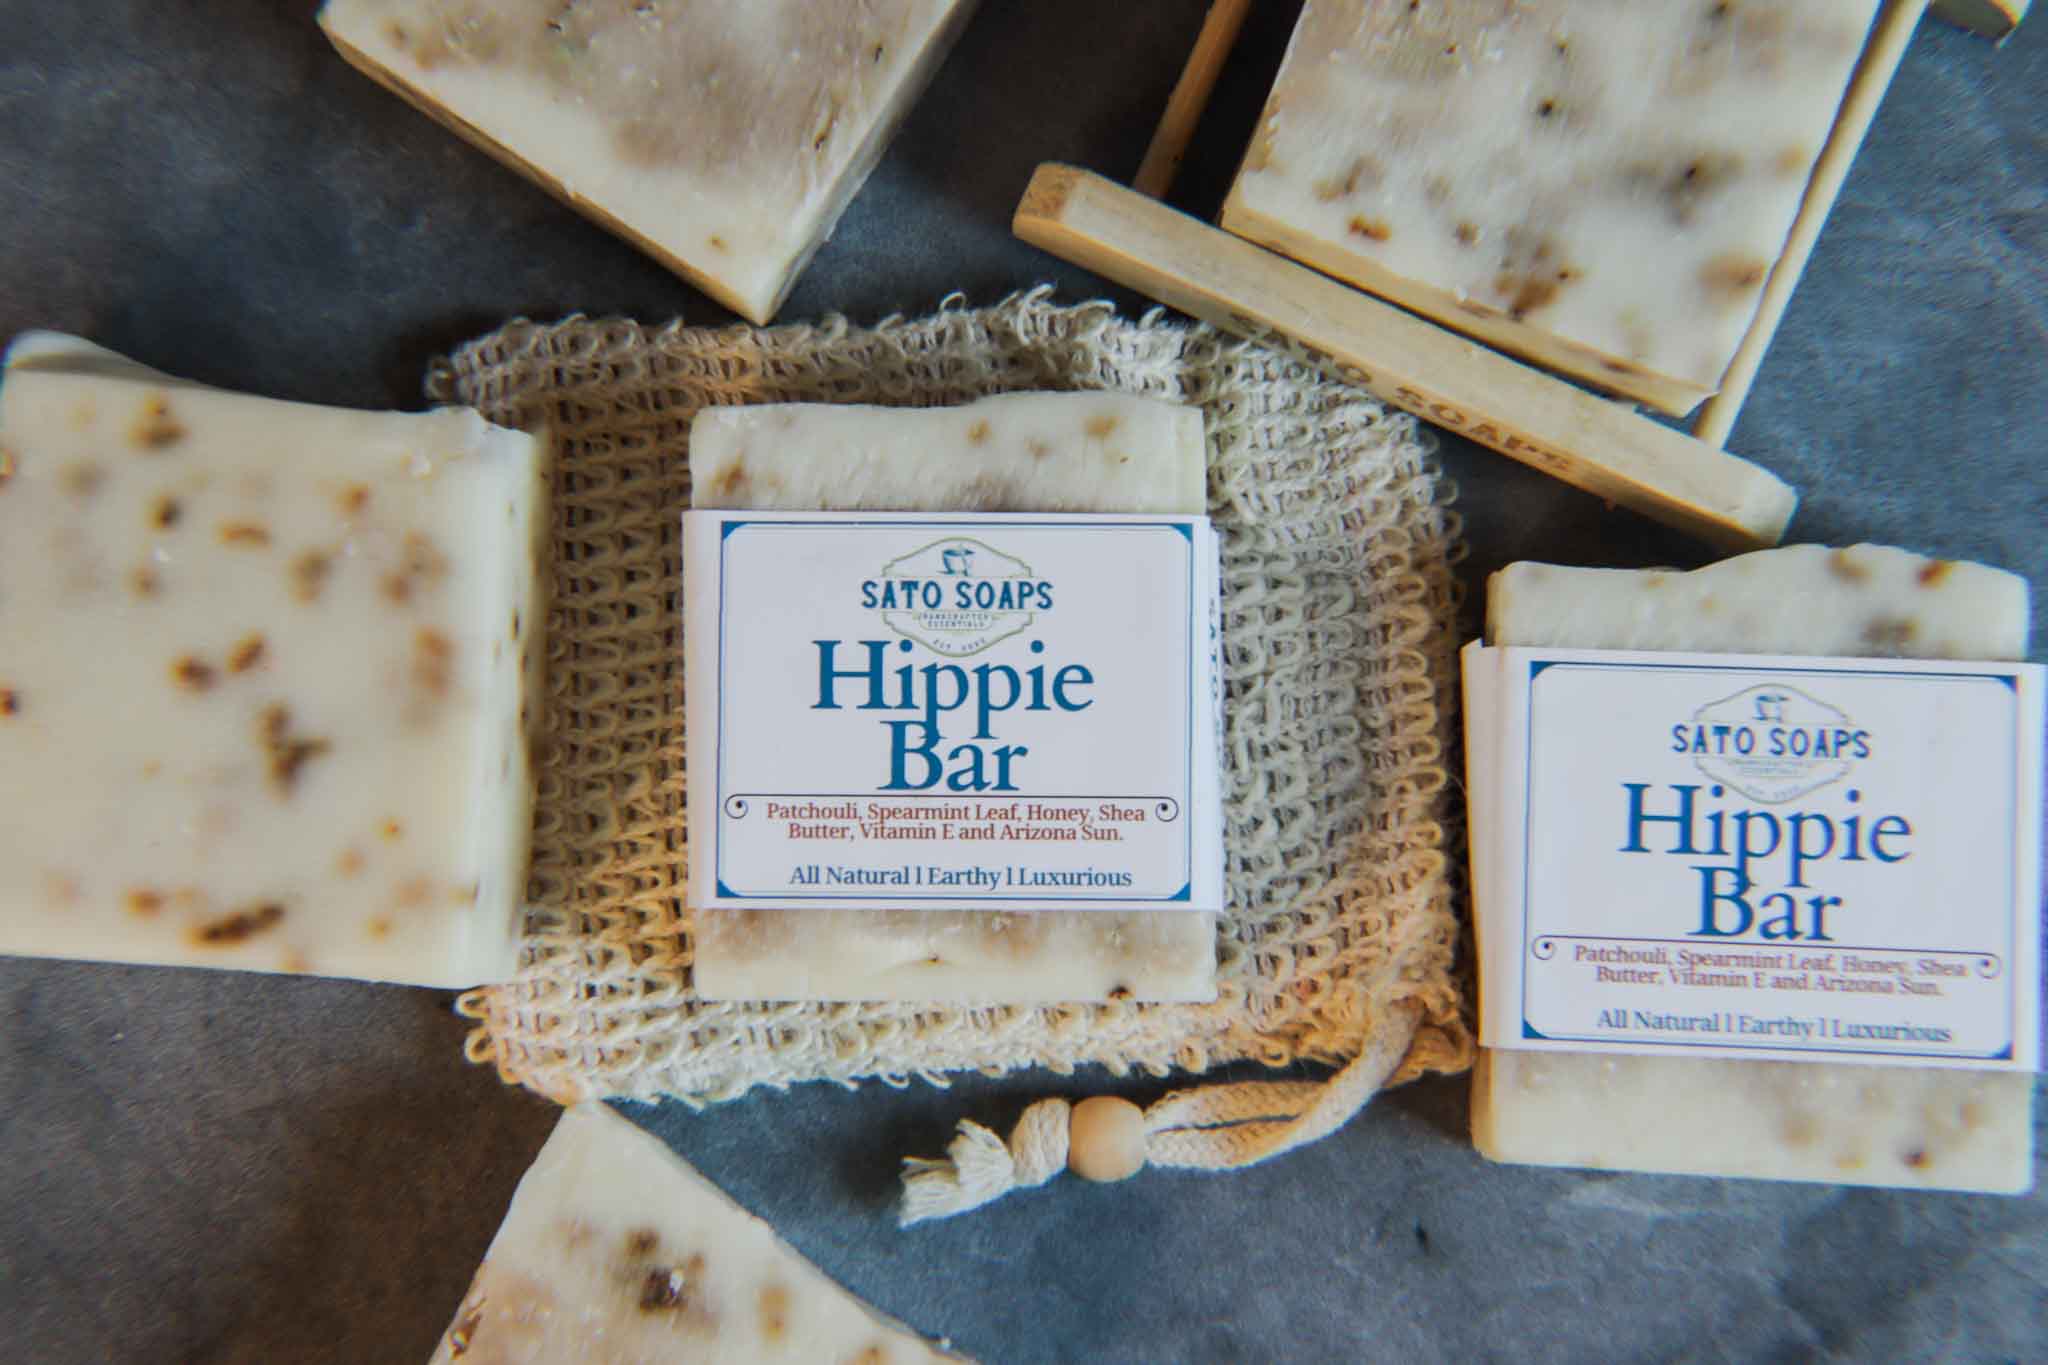 The Hippie Bar Soap (Patchouli and Spearmint Leaf Herbal Soap)